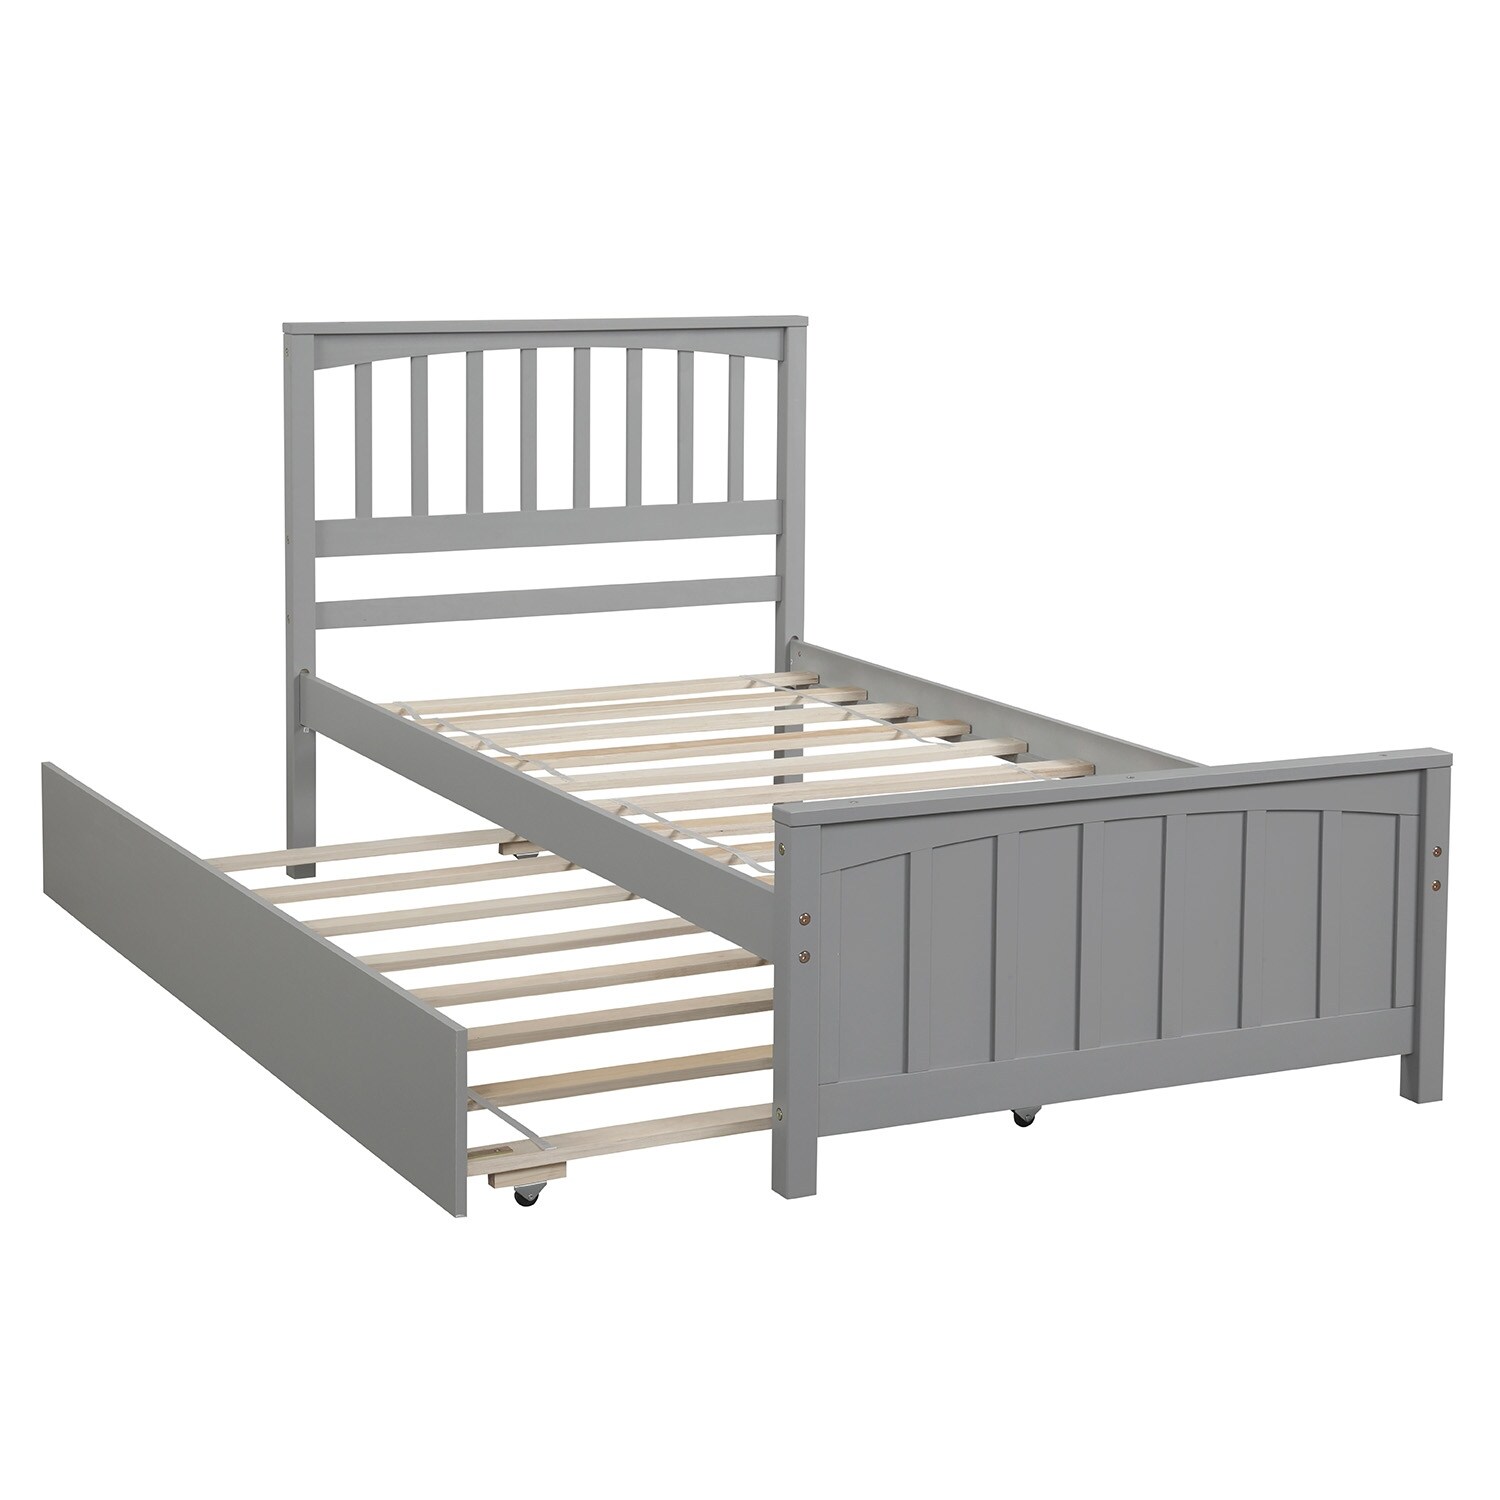 Classic And Stylish Design Twin Size Upholstered Platform Bed House Bed Kids Bed With Trundle